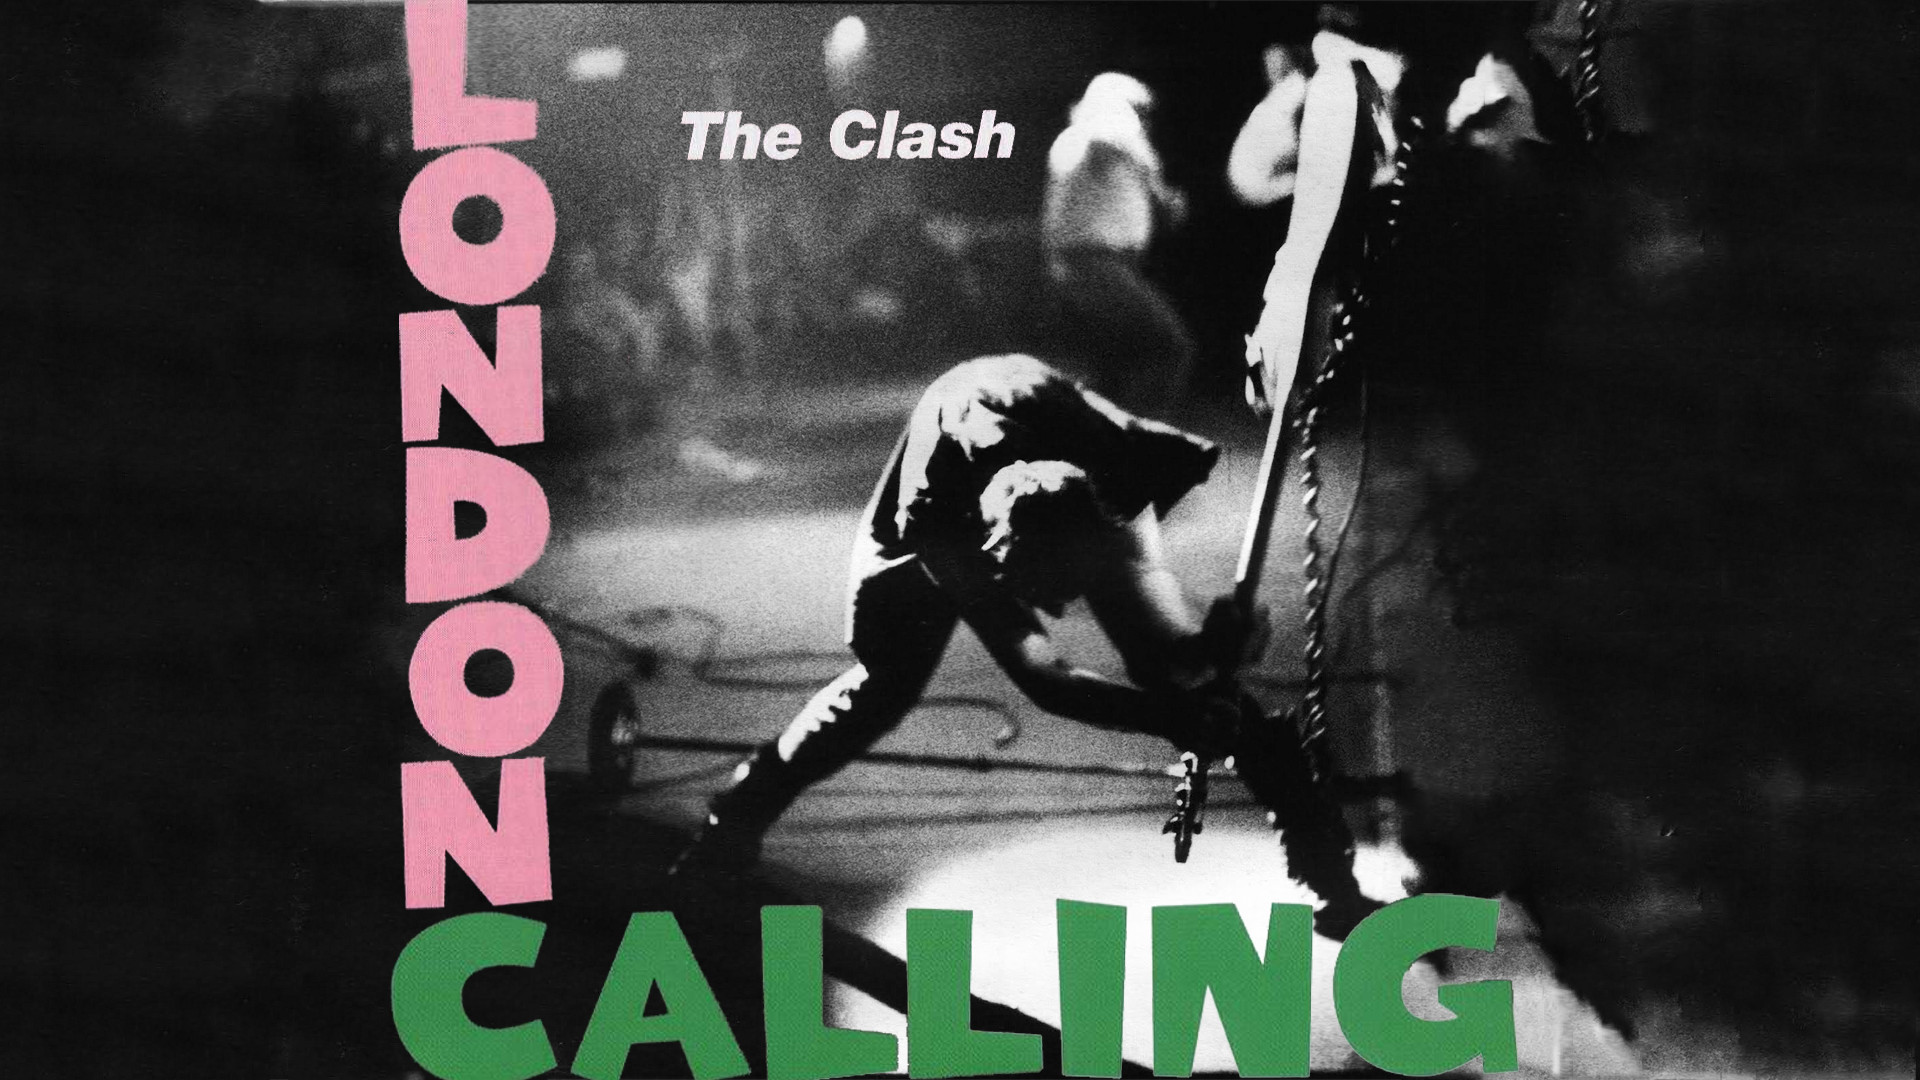 Request: A wallpaper of the Clash's London Calling Album cover. Whatever resolution is easiest